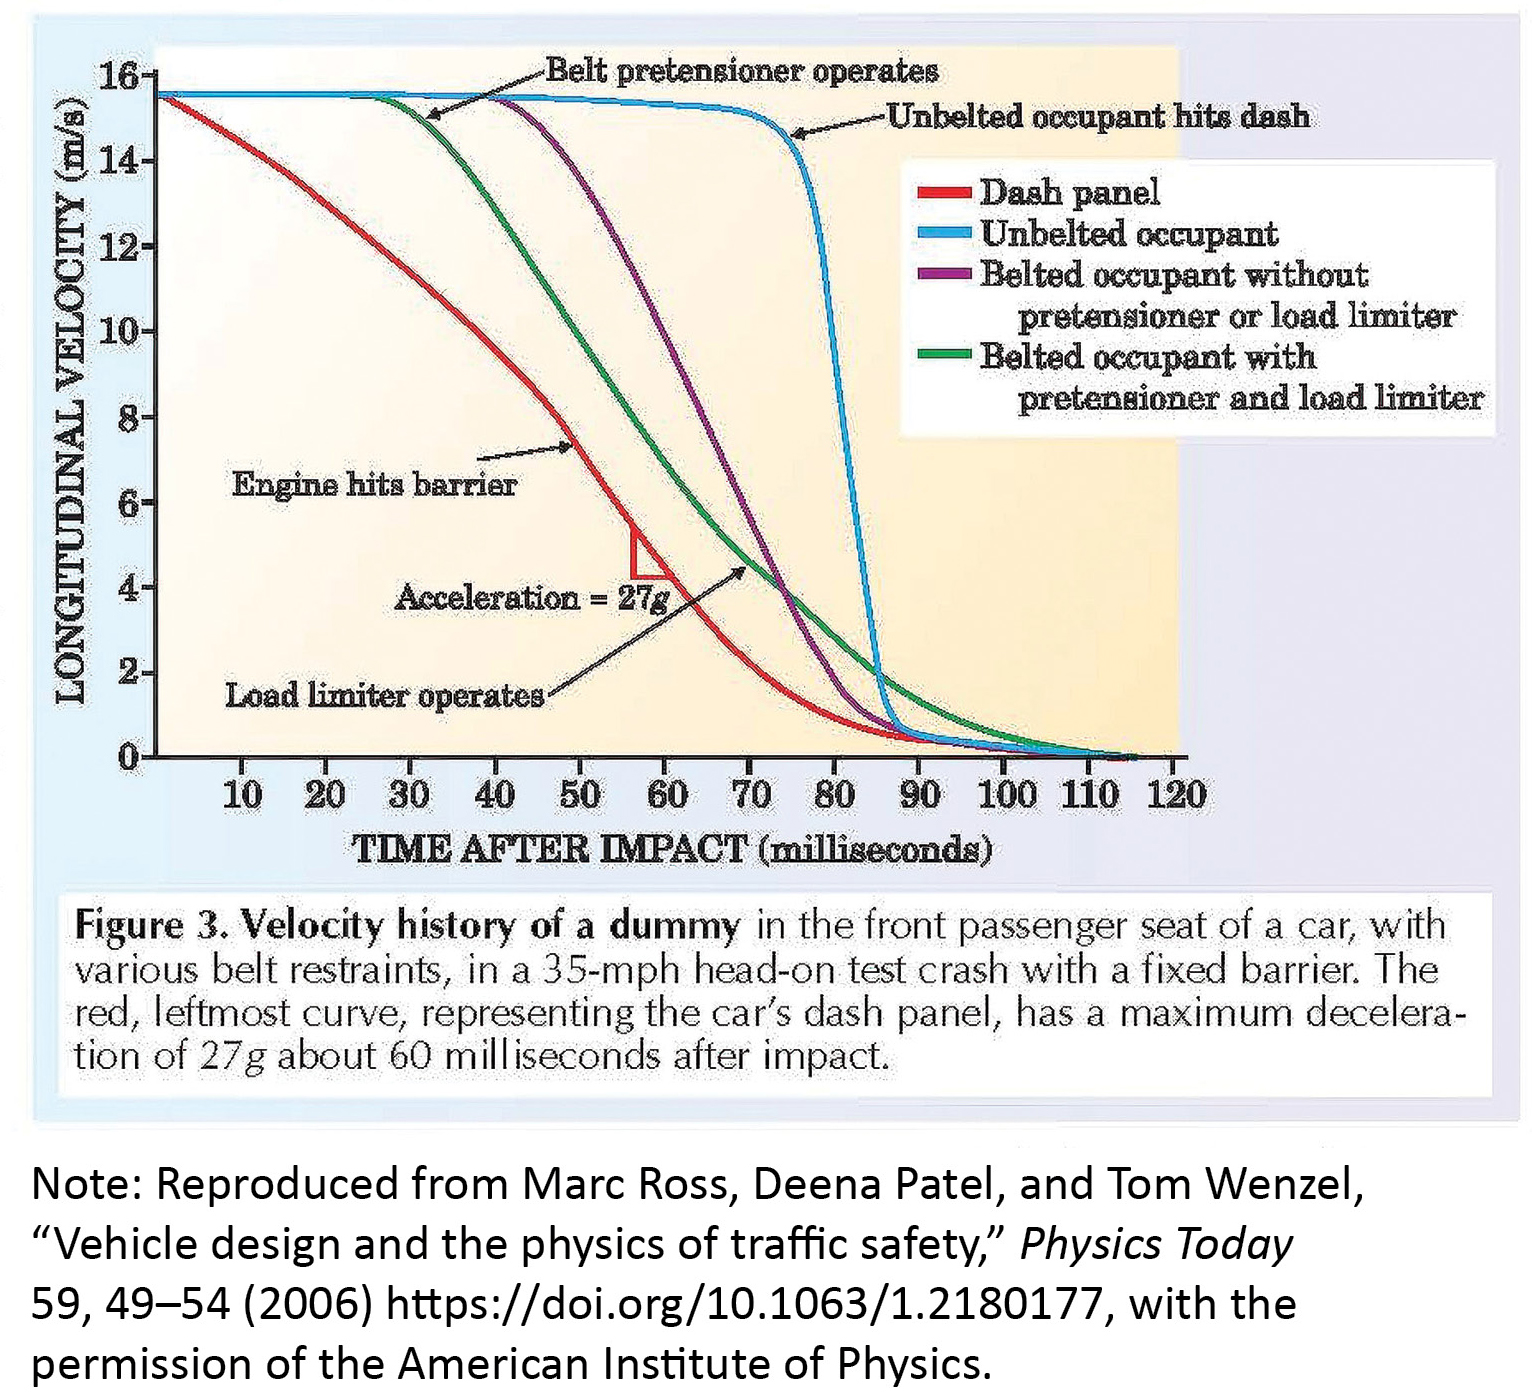 Change in velocity of a passenger with common restraints. 